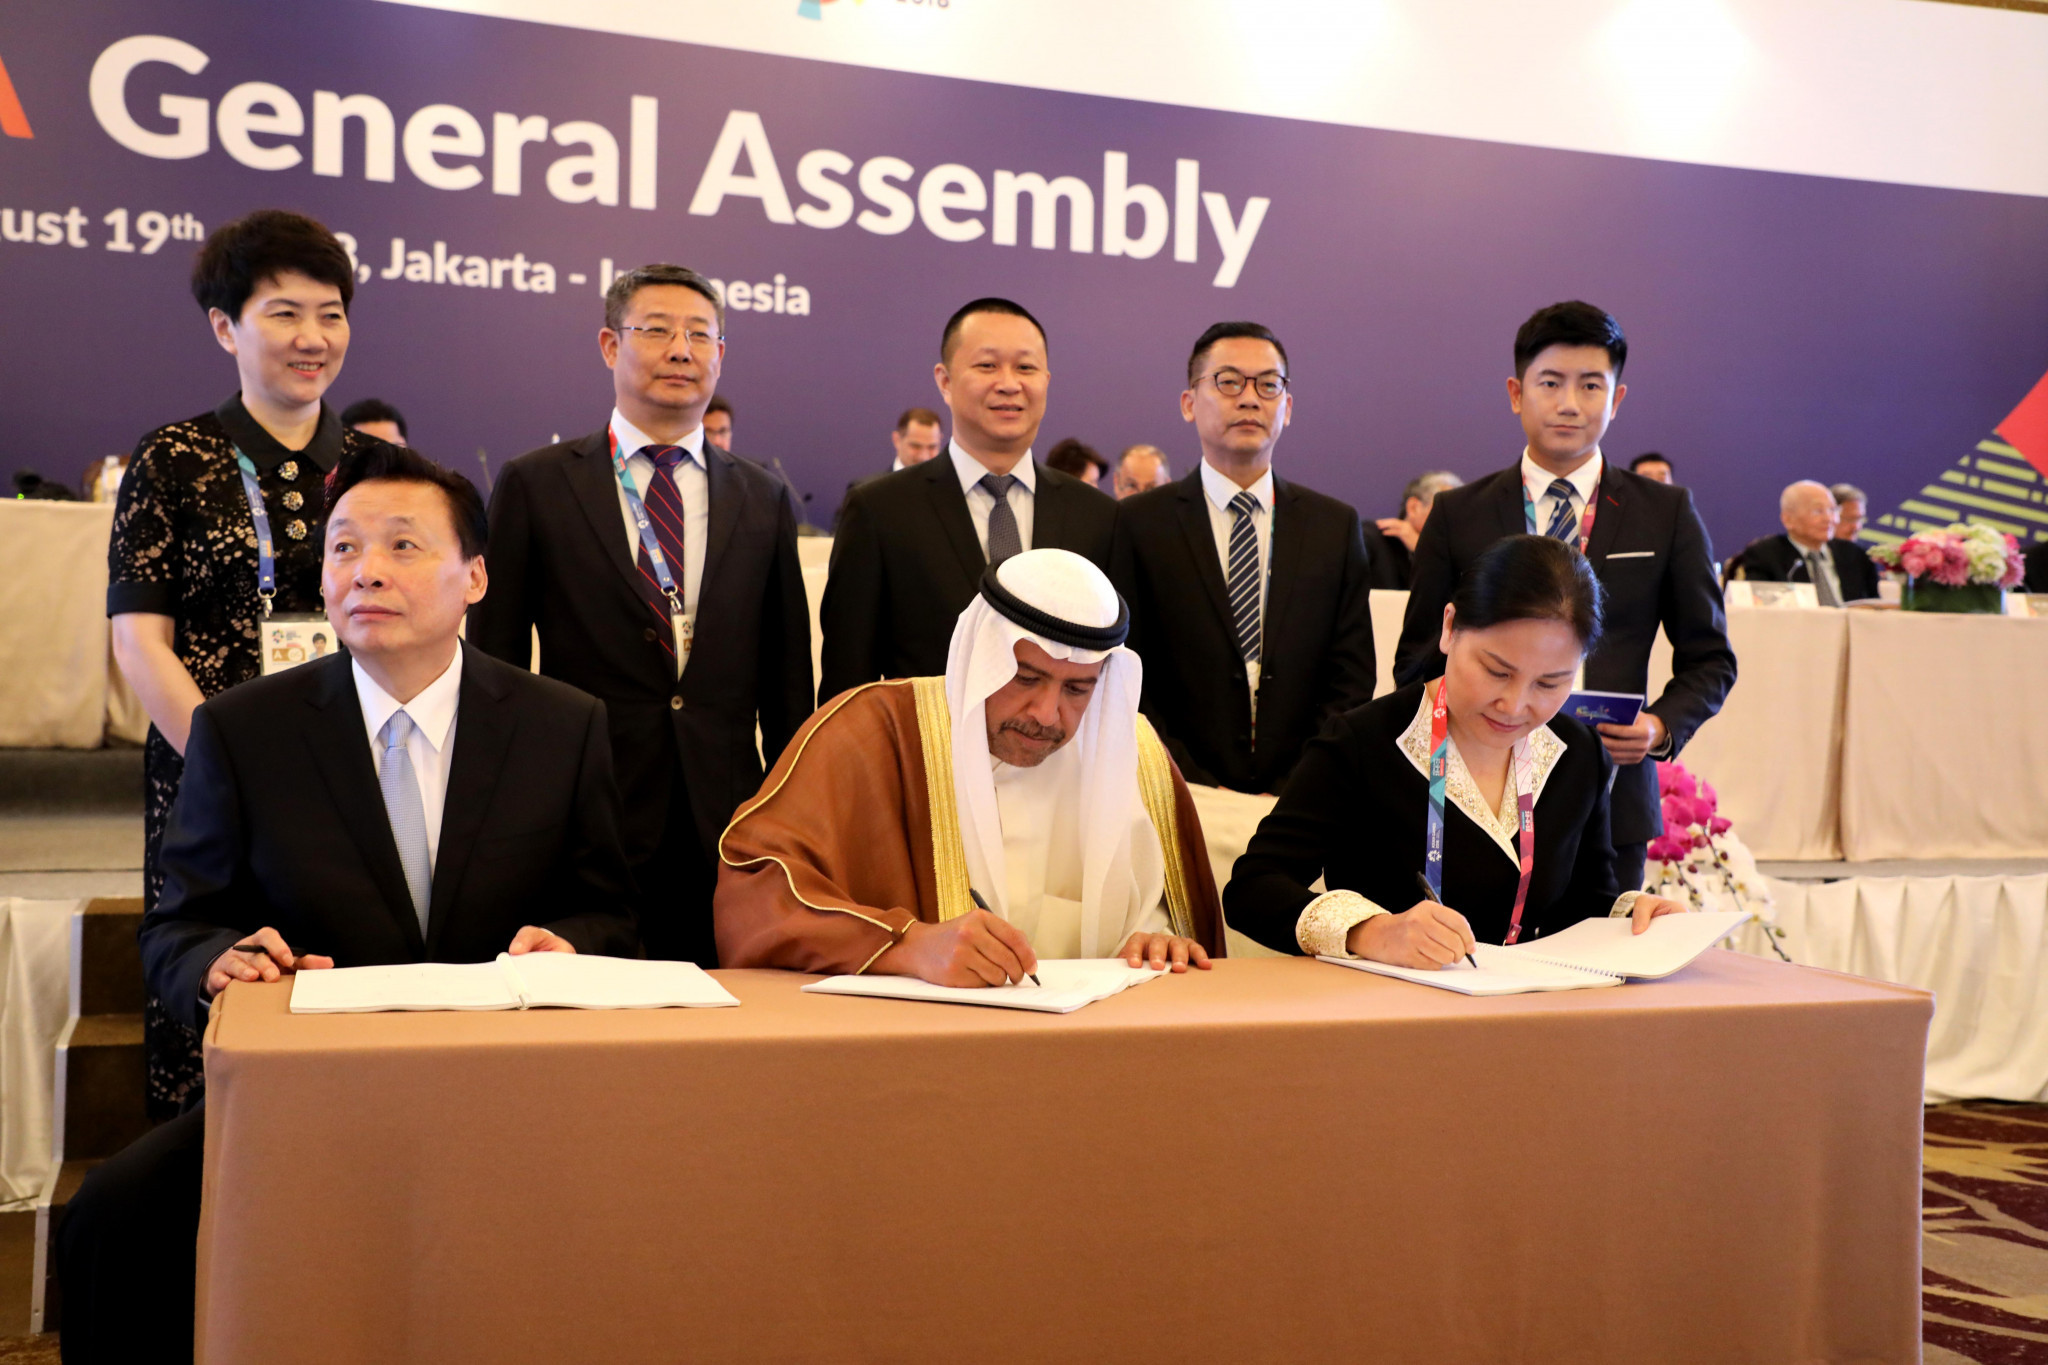 The Host City Contracts for both the 2020 Asian Beach Games in Sanya, pictured, and 2026 Asian Games in Aichi and Nagoya were signed here today at the OCA General Assembly ©OCA